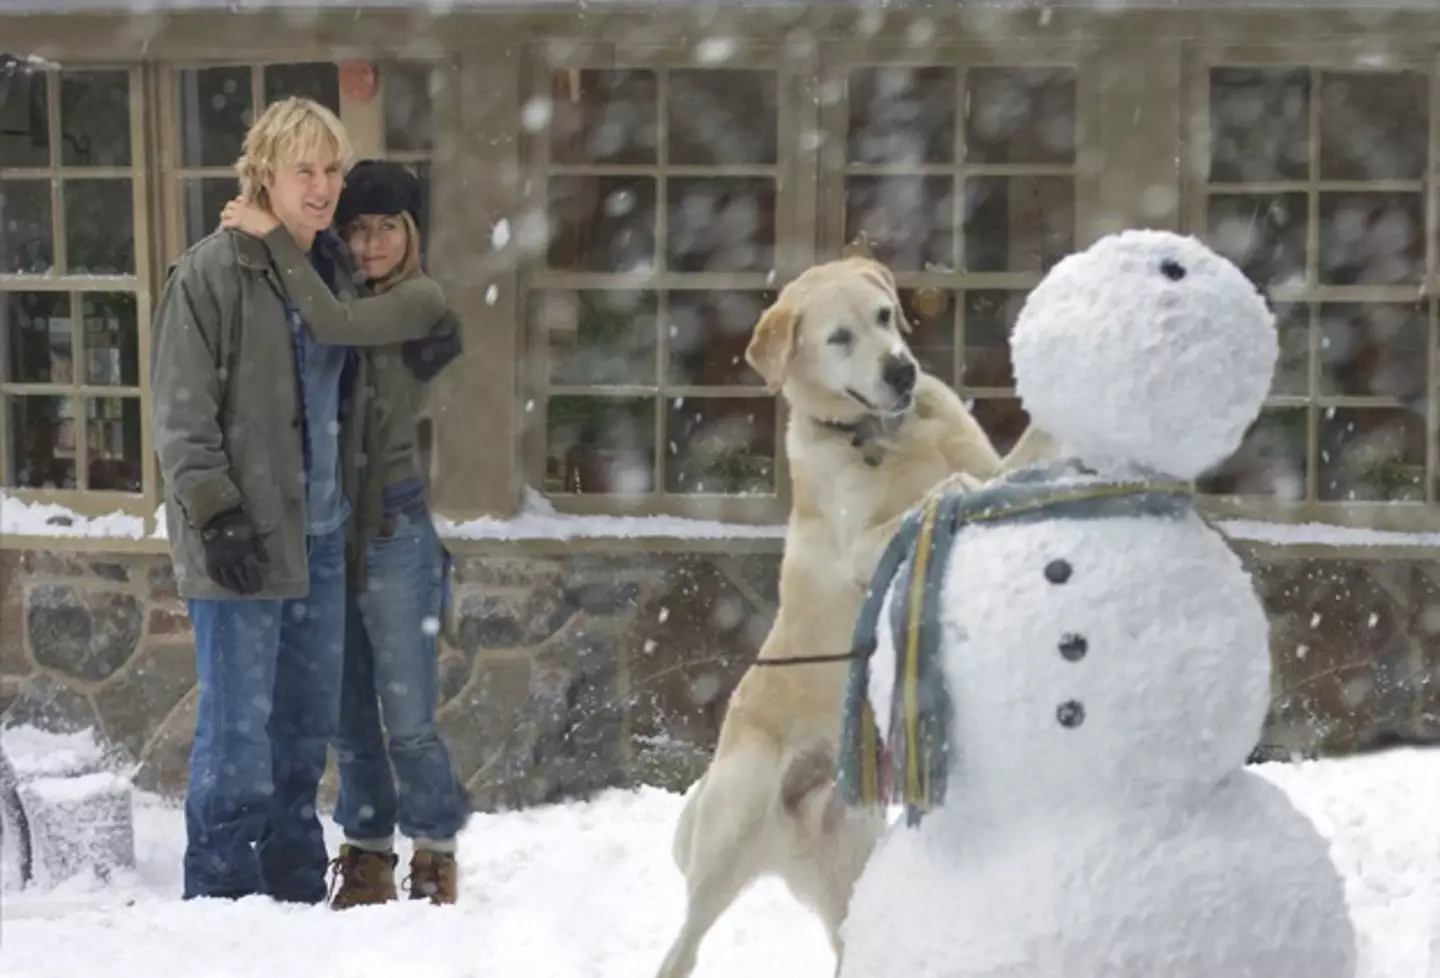 2008's Marley & Me has also been taken off the platform.